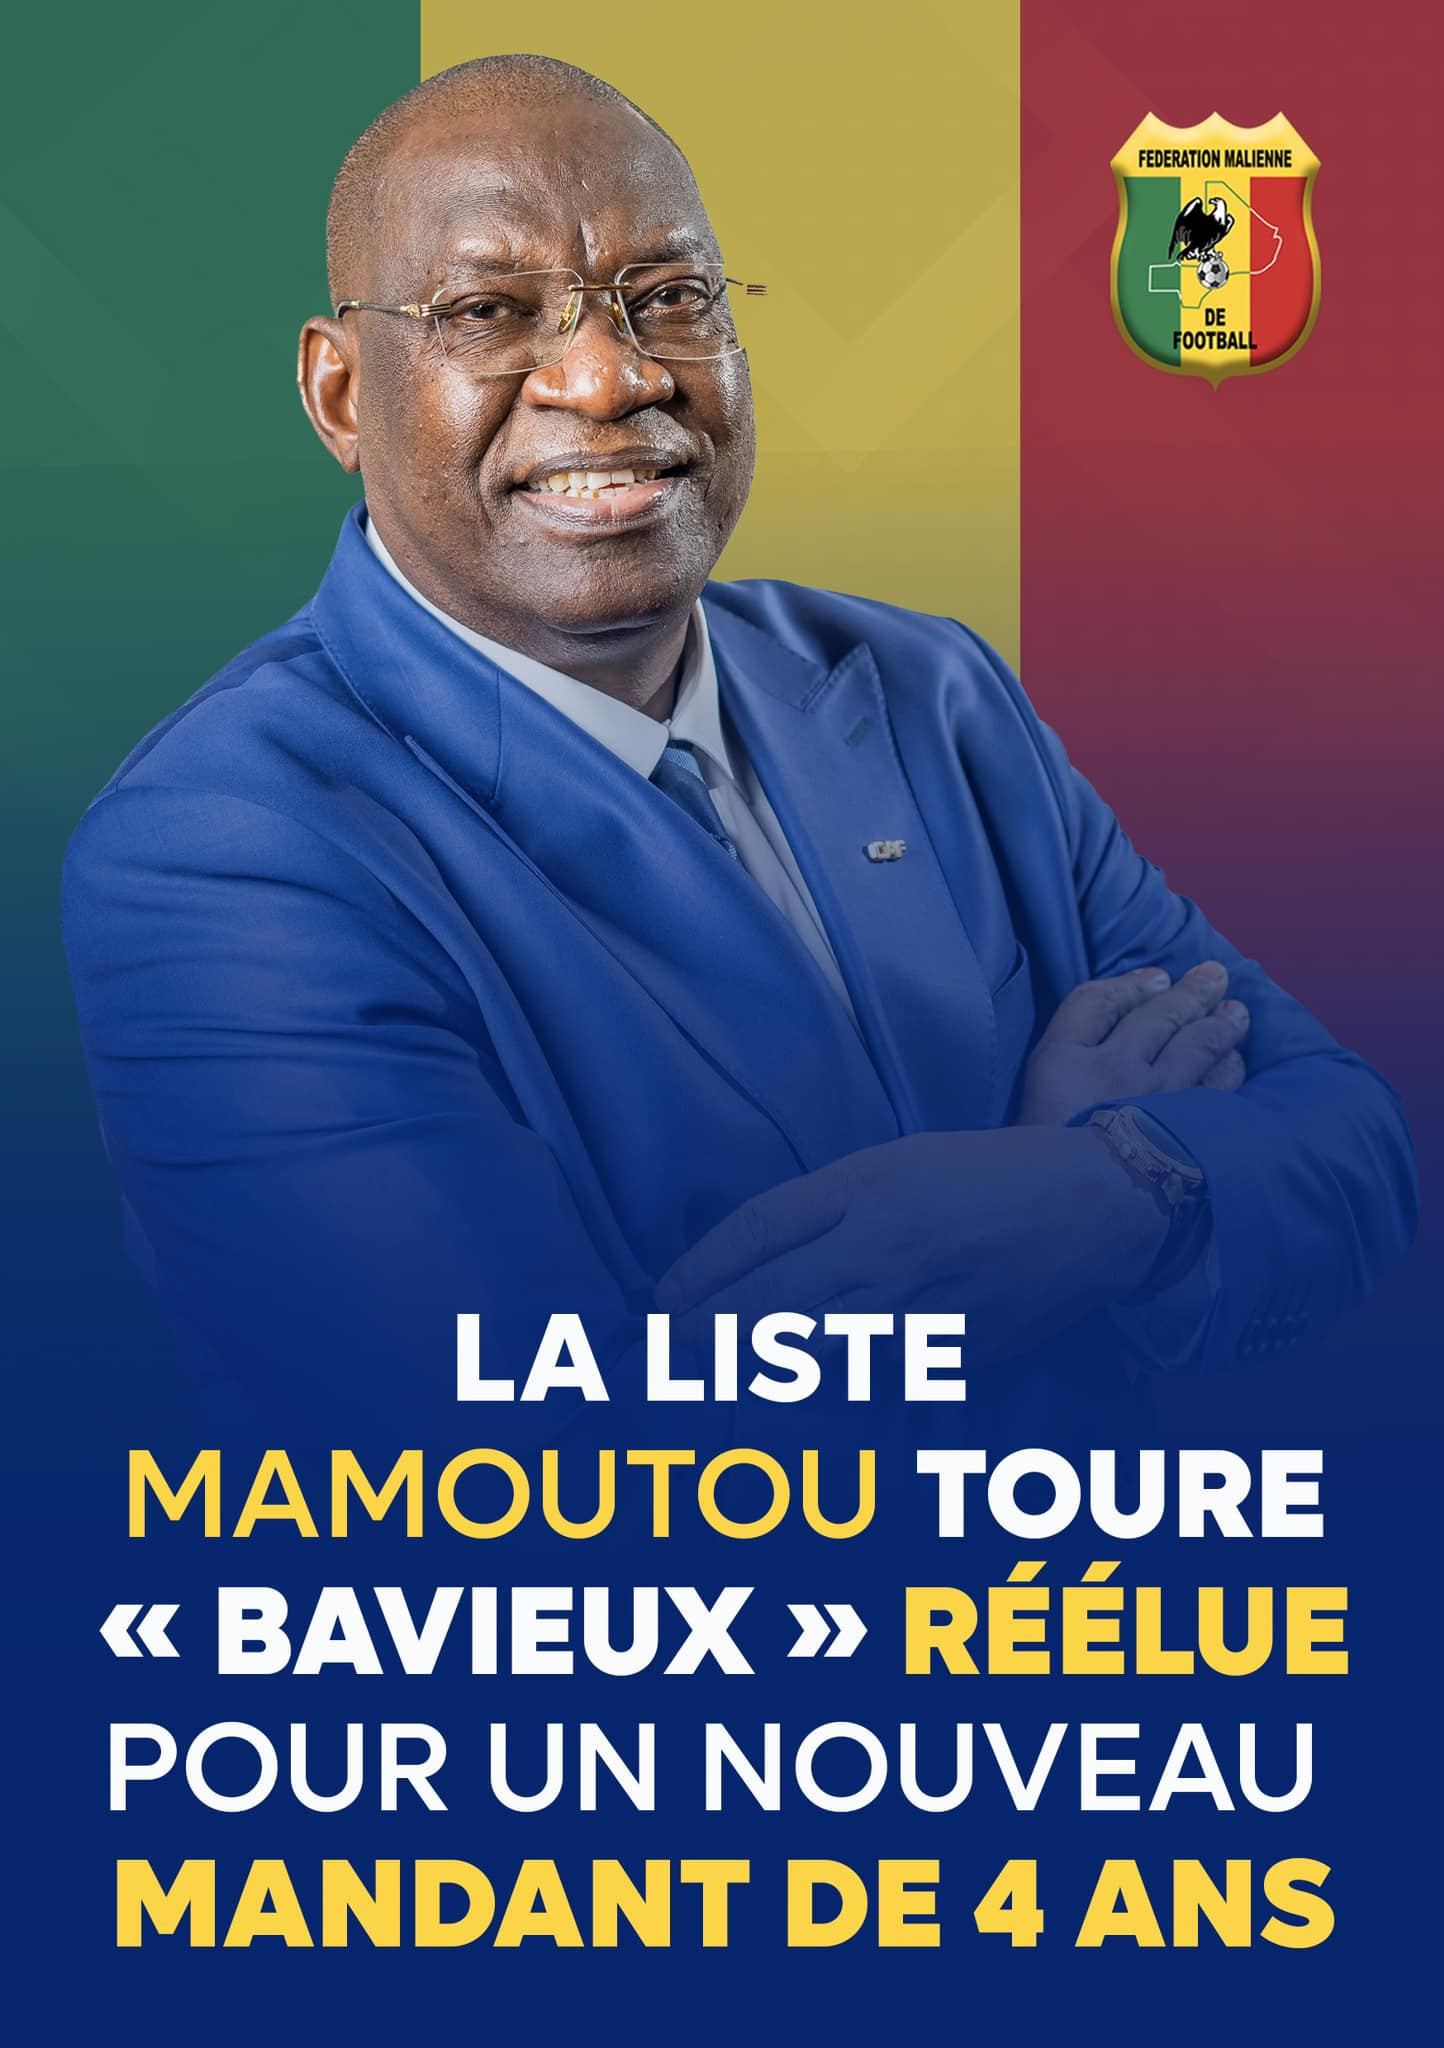 Touré secures disputed re-election as Malian Football Federation President despite being in prison